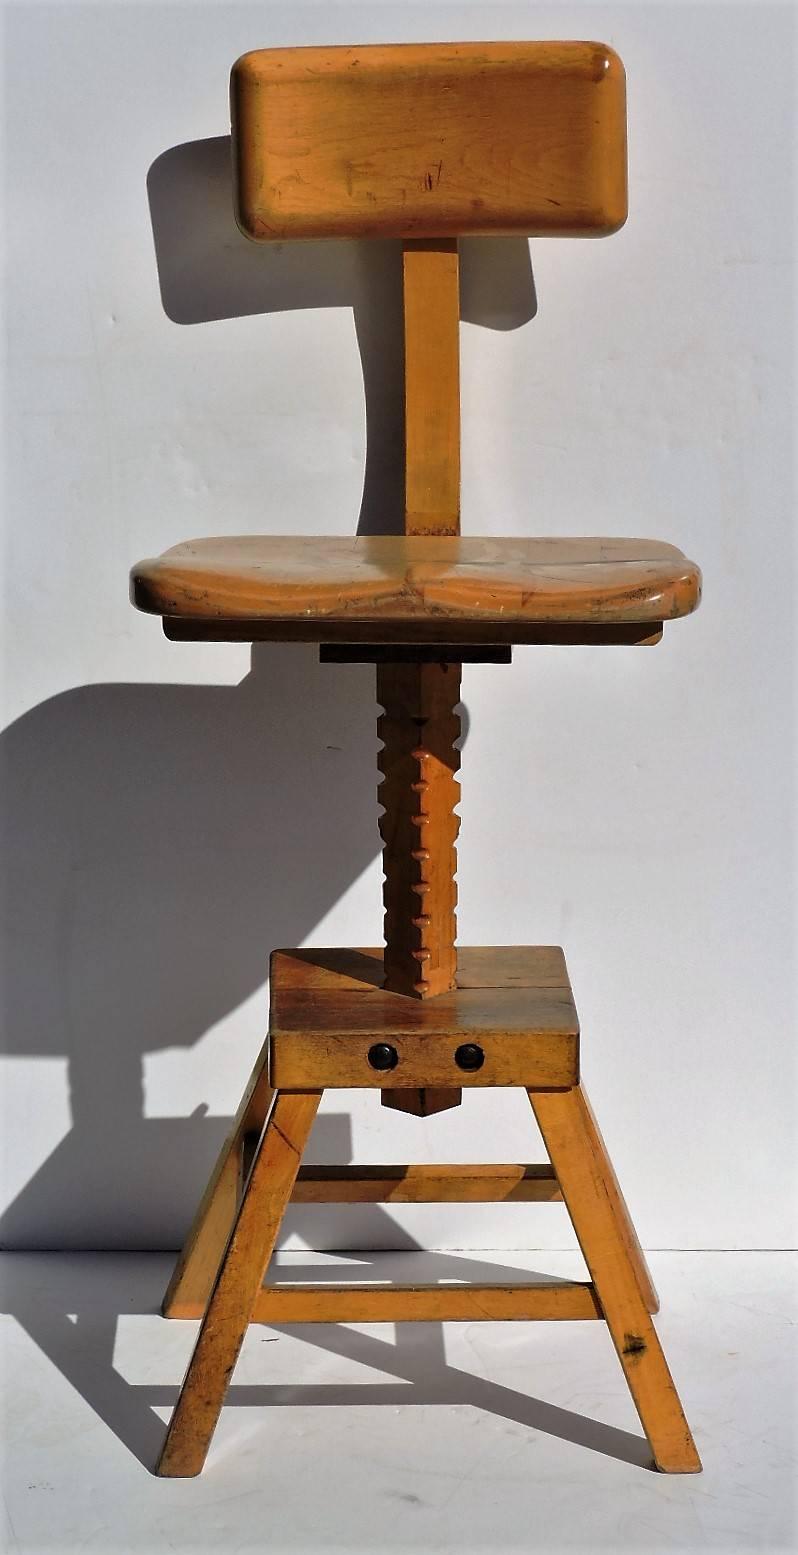 Golden solid maple wood adjustable position Industrial sculptors work stool with a shaped seat that can be moved forward and backward by loosening bolts on frame / a seat height that can raised up and down by loosening bolts on frame / top back rest